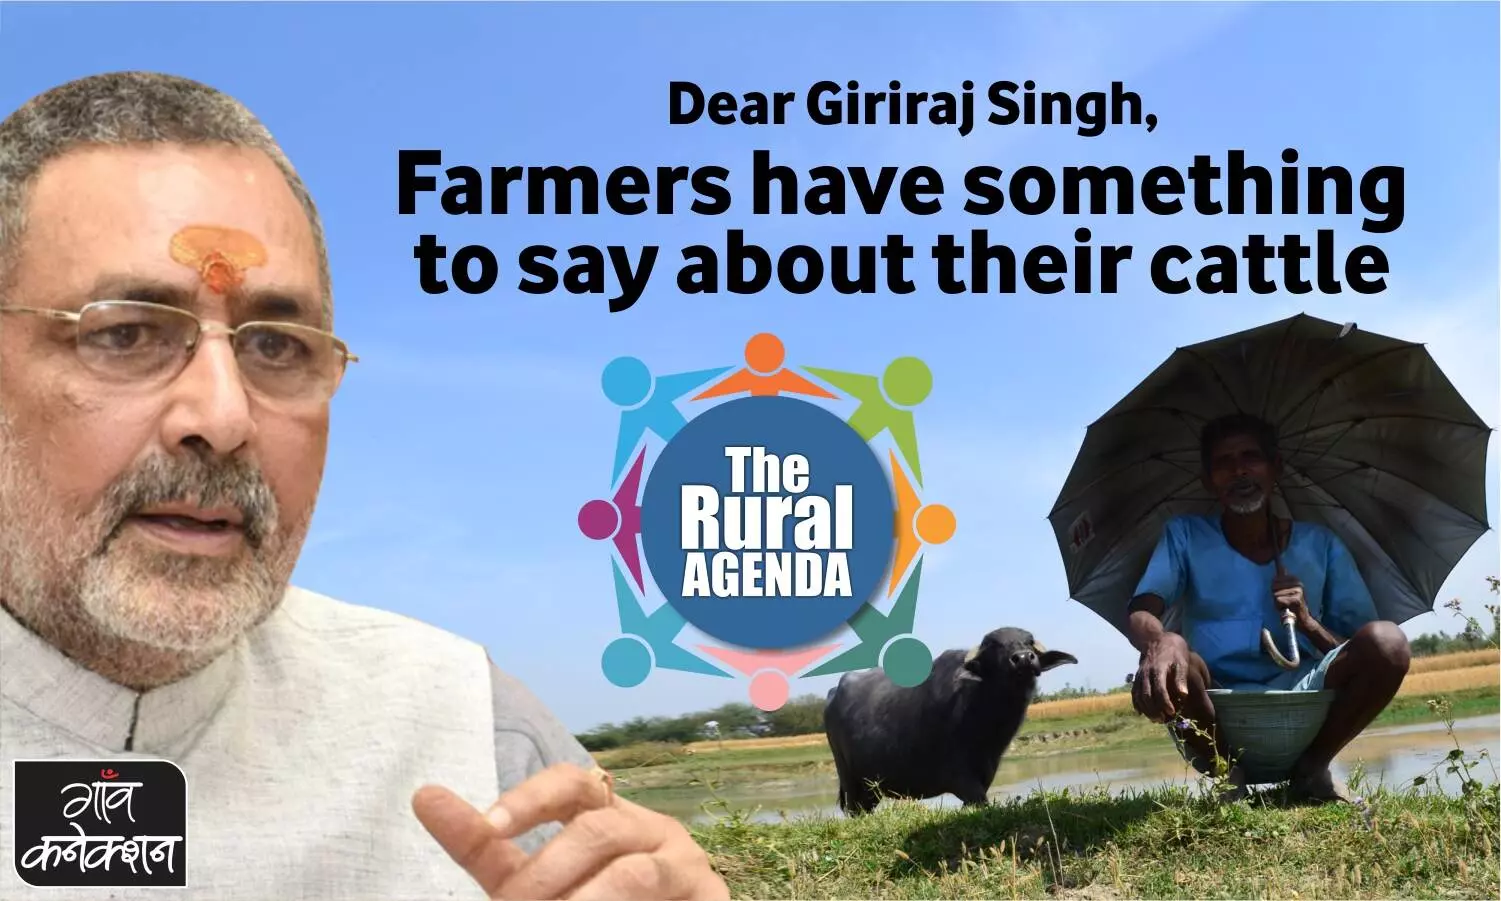 Farmers need a helping hand from the govt for their cattle